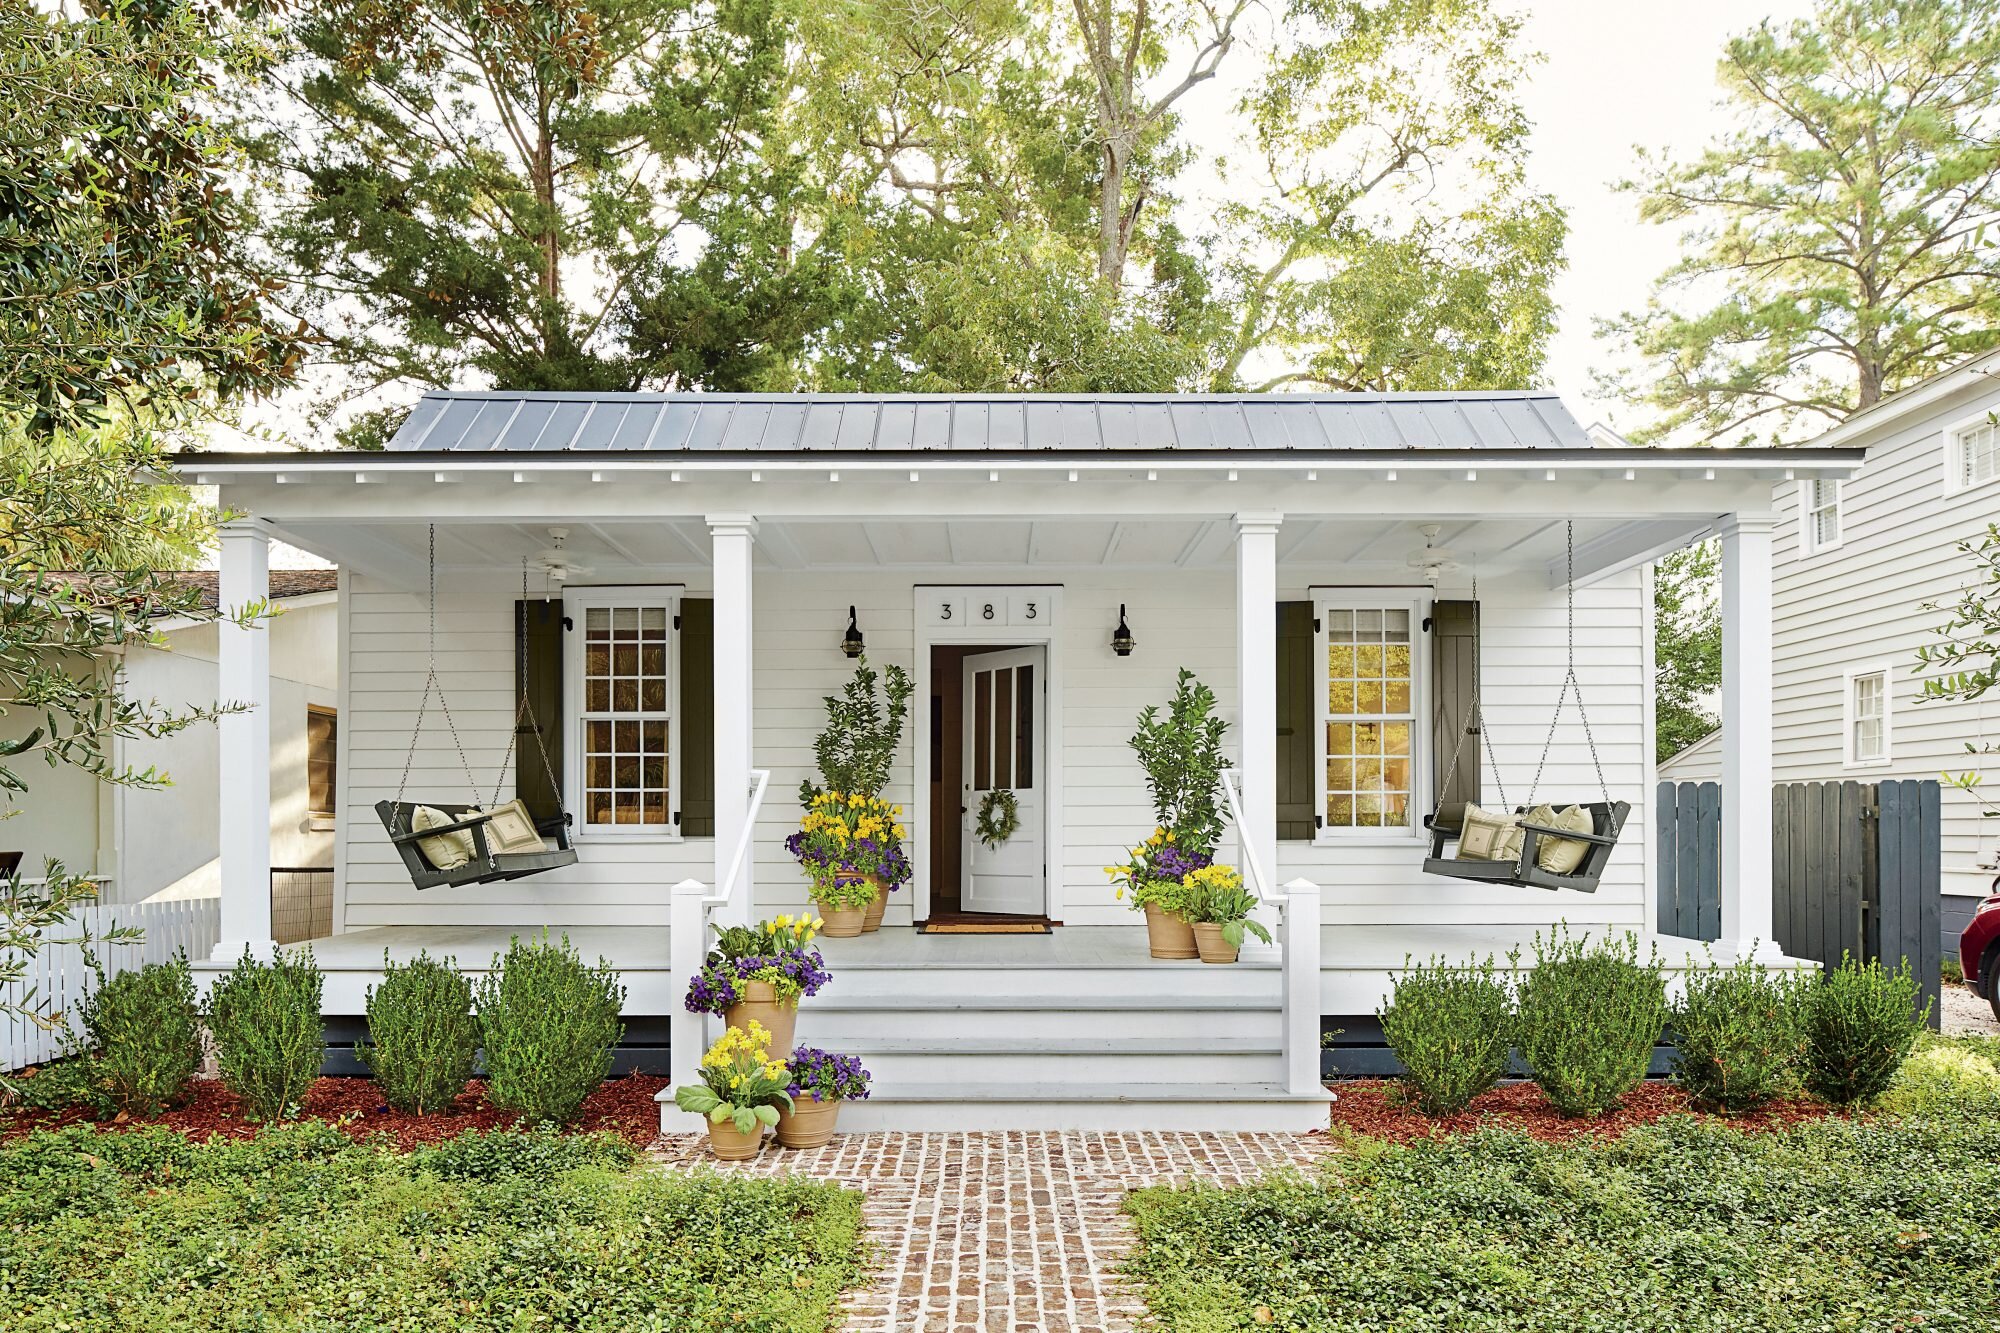 Secrets to Styling an Inviting Front Porch